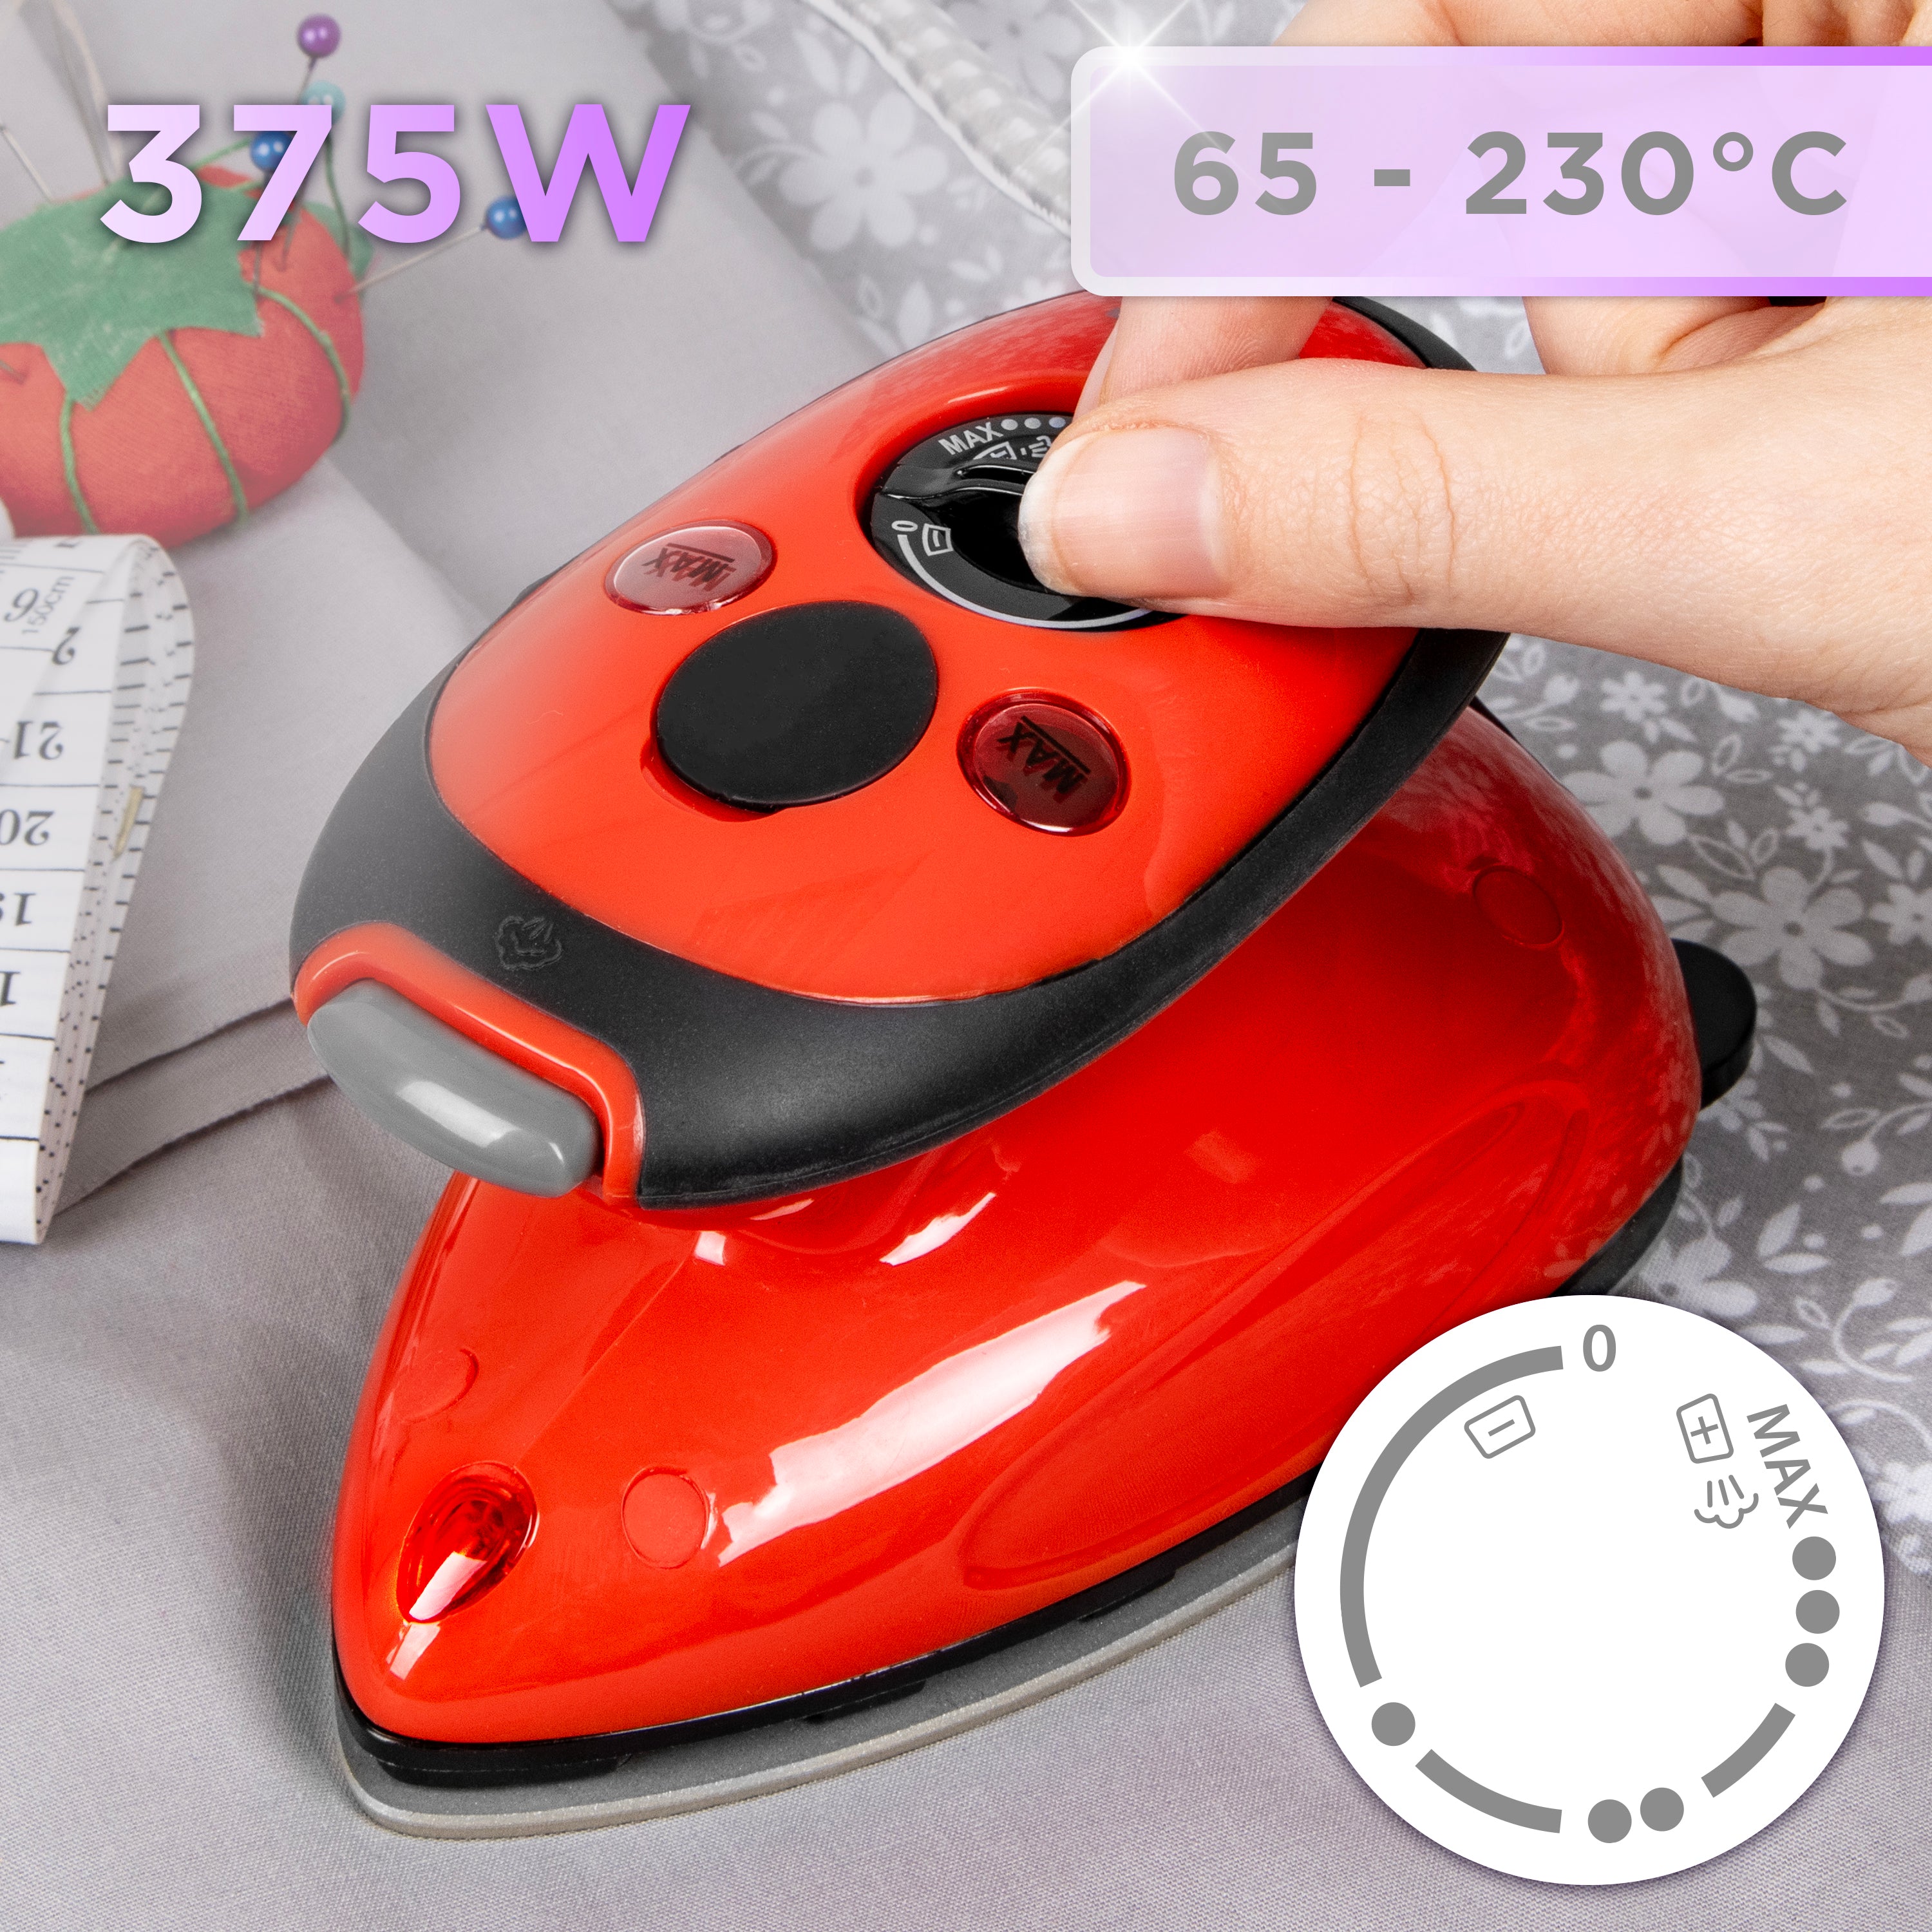 Duronic Travel Iron Si2 RD mini Compact Steamer Quilting Iron 375W 50ml Capacity With Brush and Variable Heat Settings, Patchwork, Applique, Craft For Holiday Red